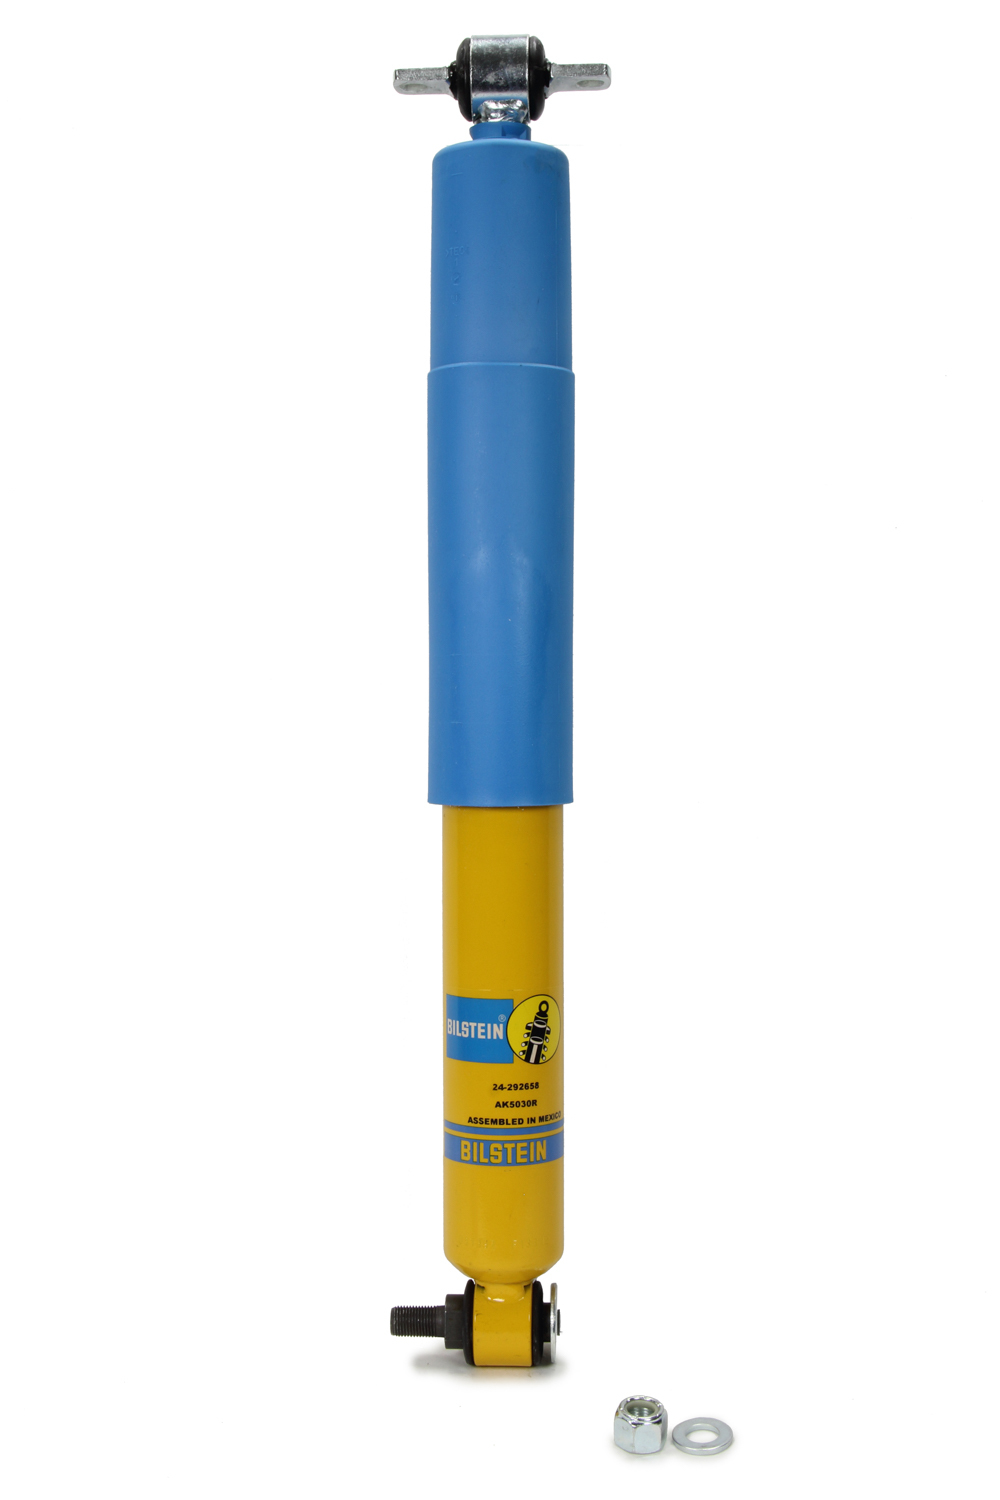 Bilstein 24-292658 Shock, AK Series, Monotube, 13.11 in Compressed / 20.31 in Extended, Digressive, Steel, Yellow Paint, Rear, Street Stock, Each